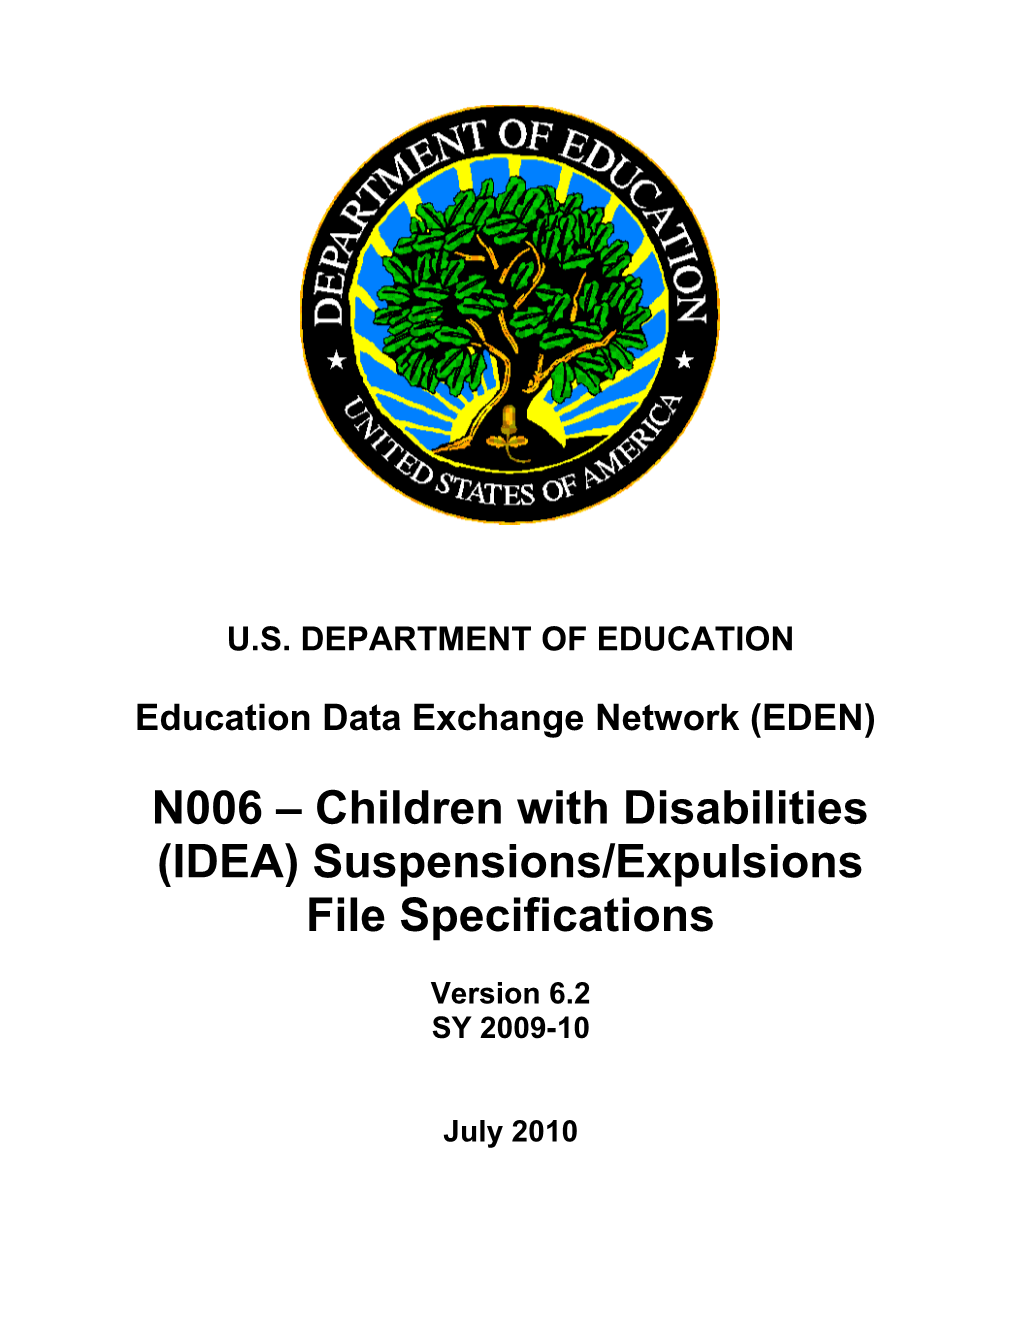 Children with Disabilities (IDEA) Suspensions/Expulsions File Specifications